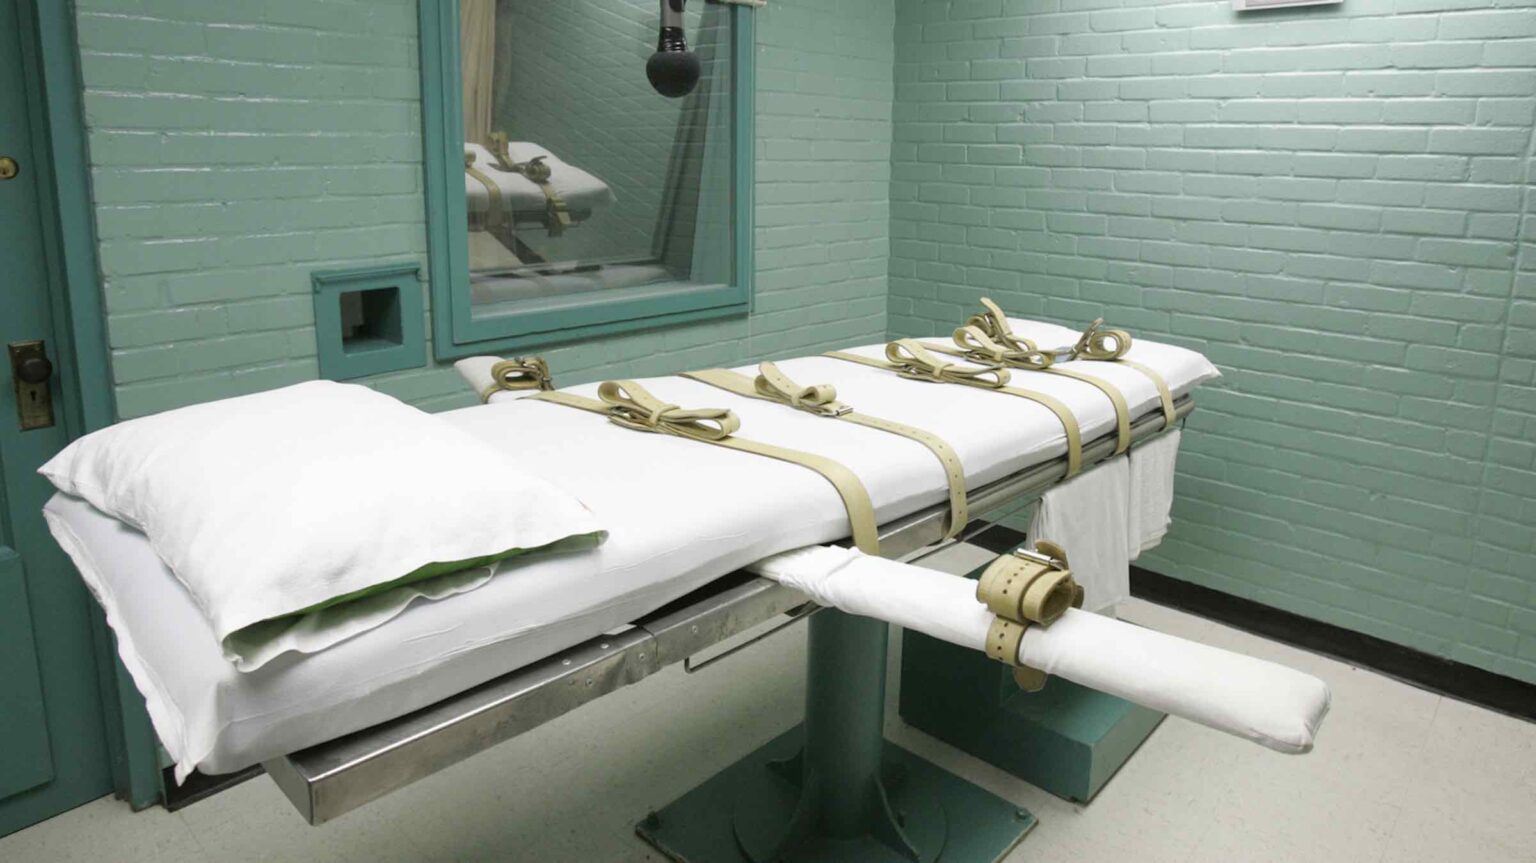 There’s a reason so many states have given up on the death penalty. Here's the moral disasters of death row as we know it.